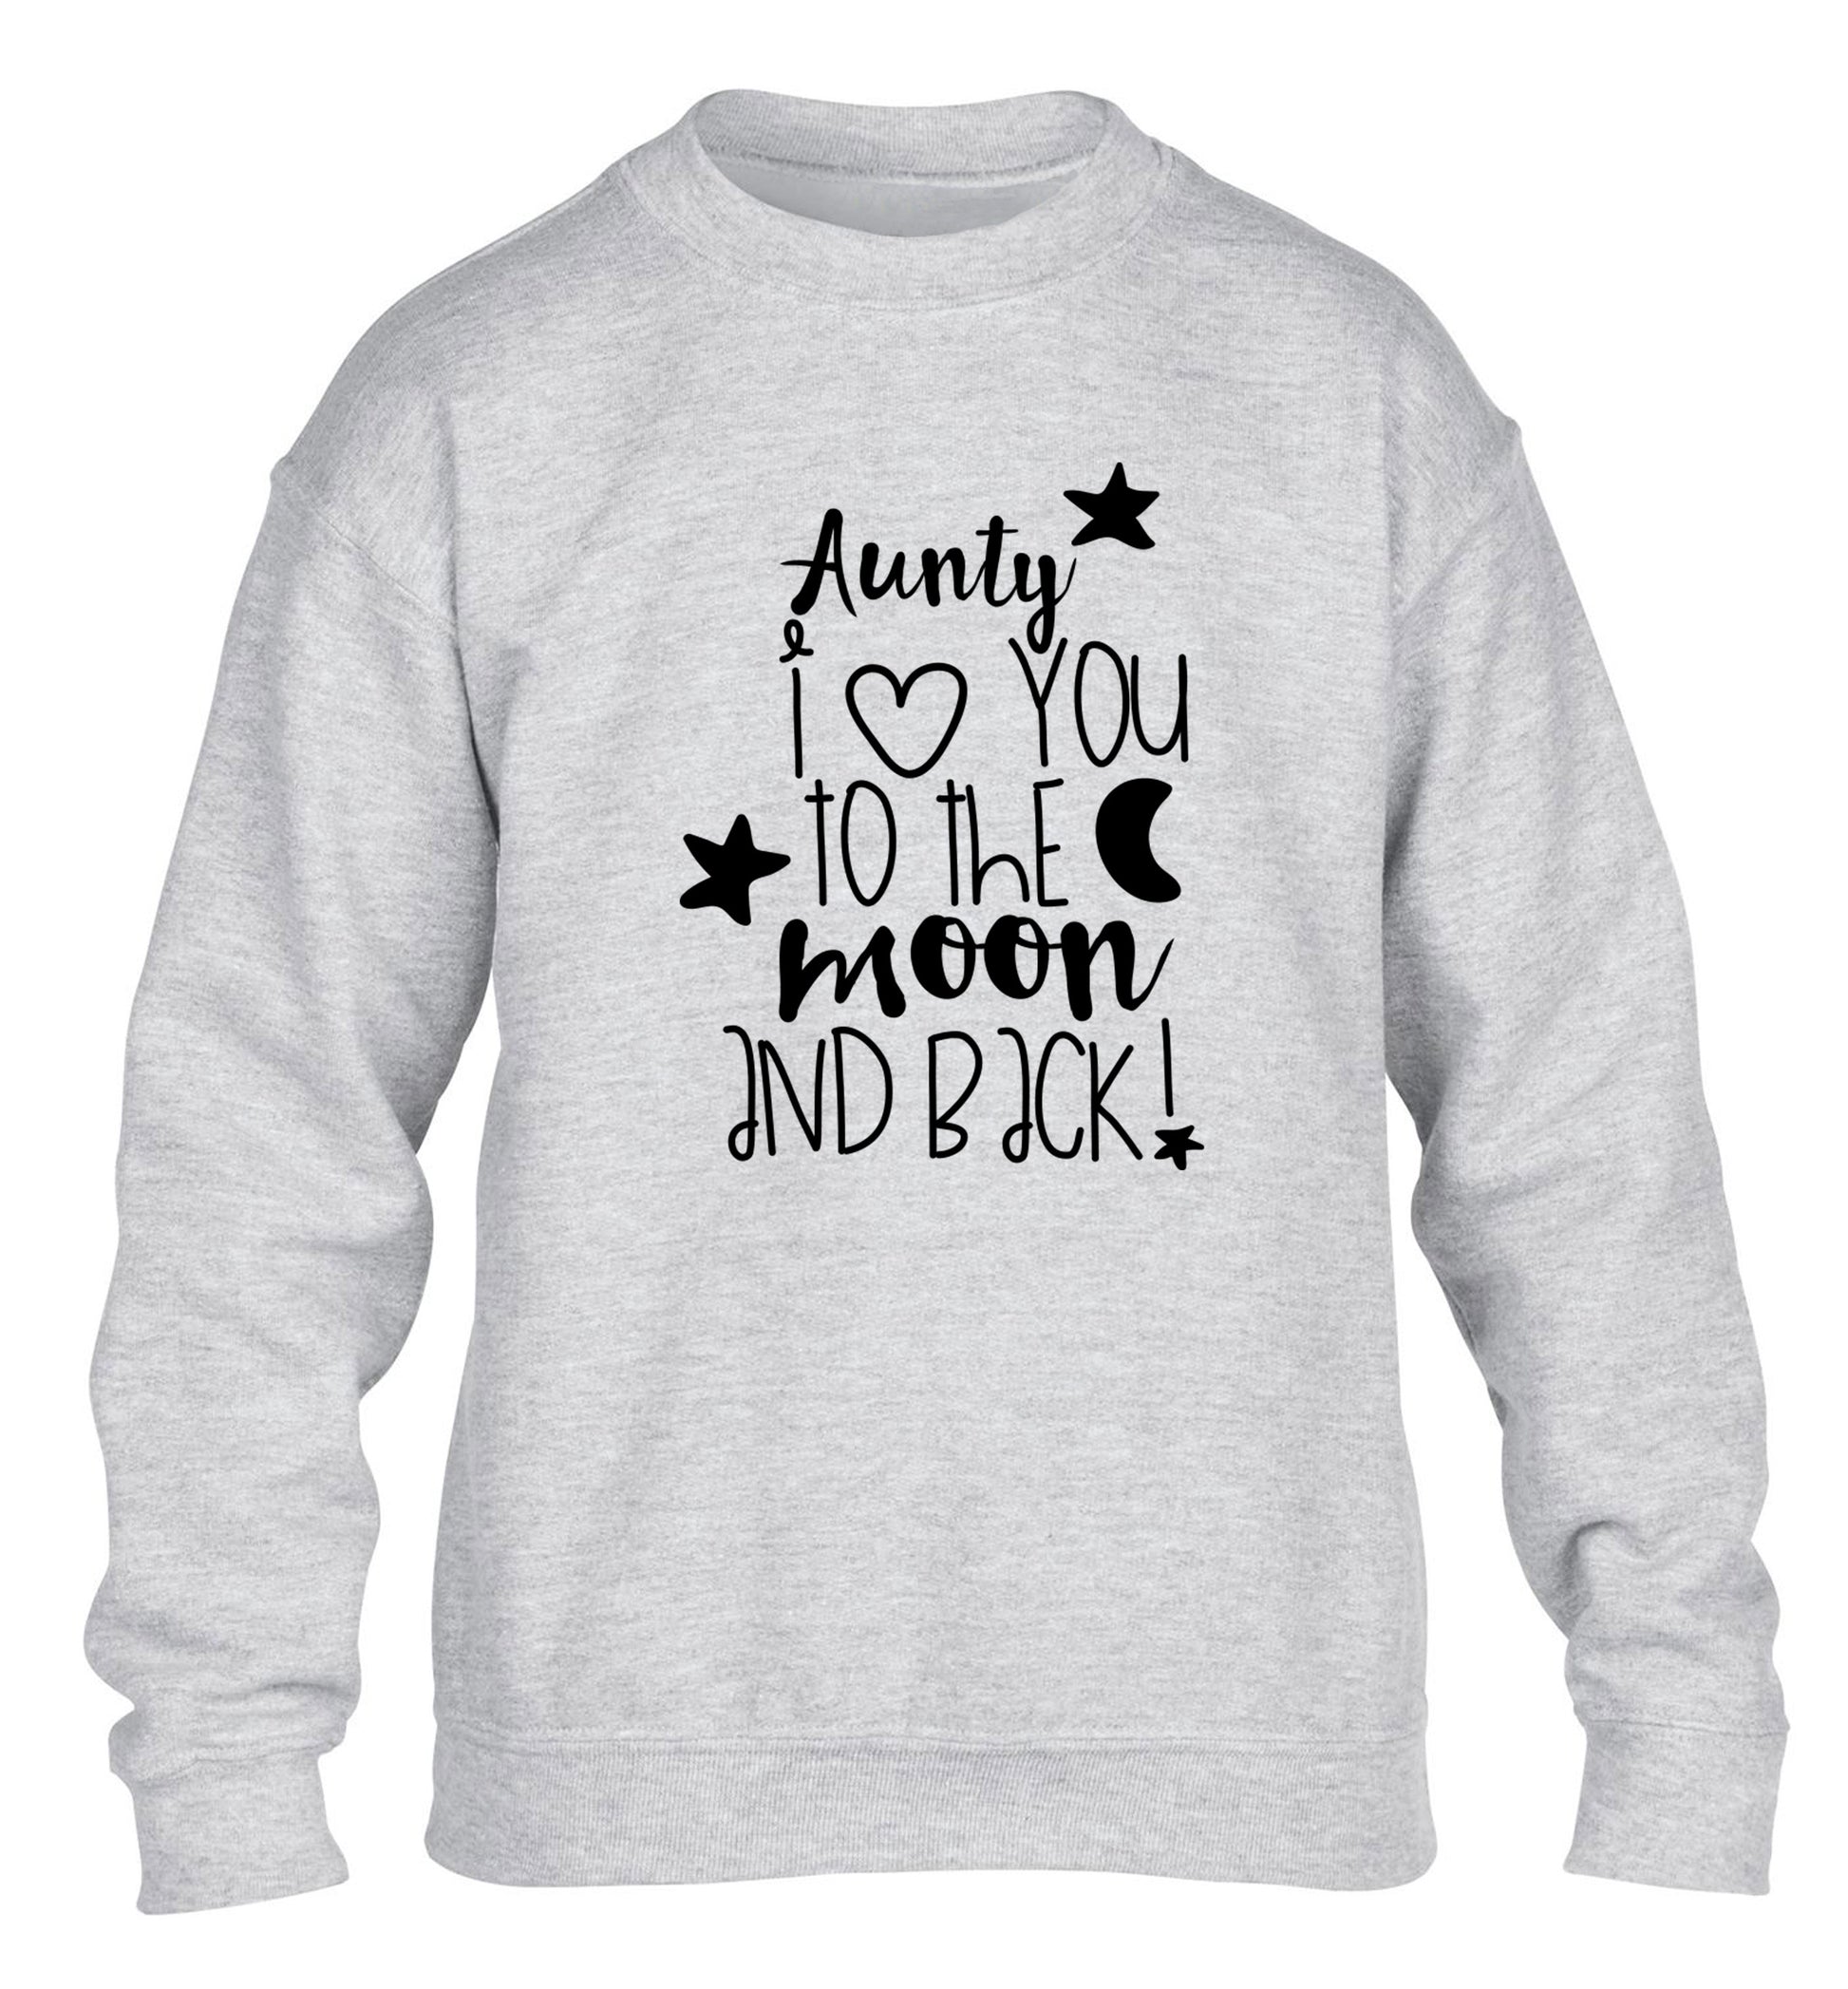 Aunty I love you to the moon and back children's grey  sweater 12-14 Years